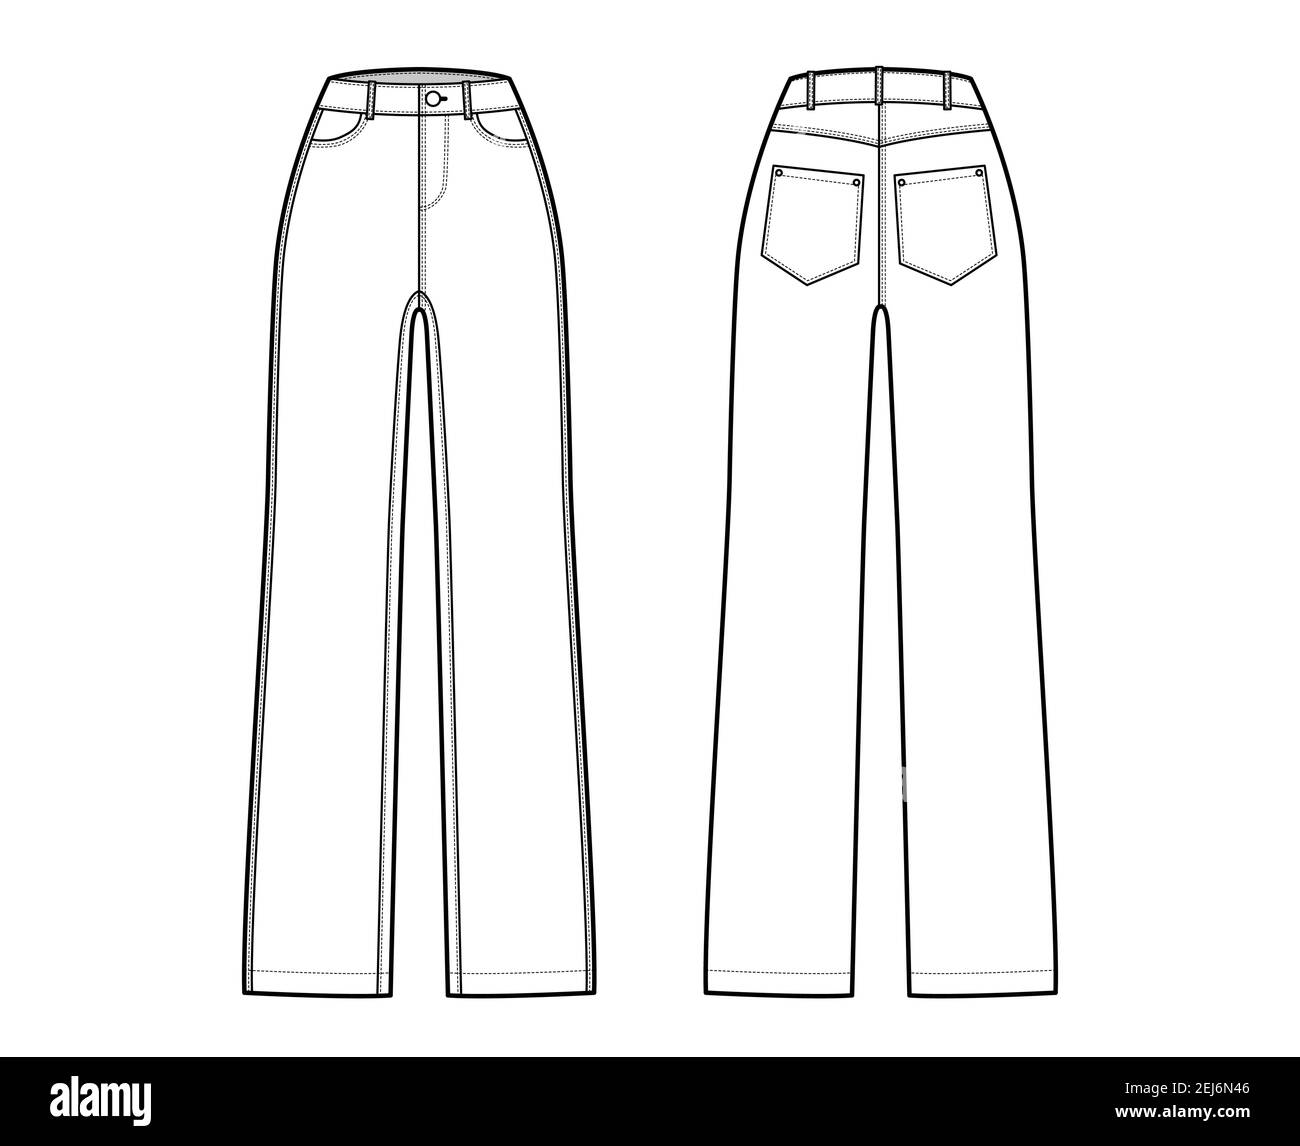 Straight Jeans Denim Pants Technical Fashion Illustration With Full Length Normal Waist High